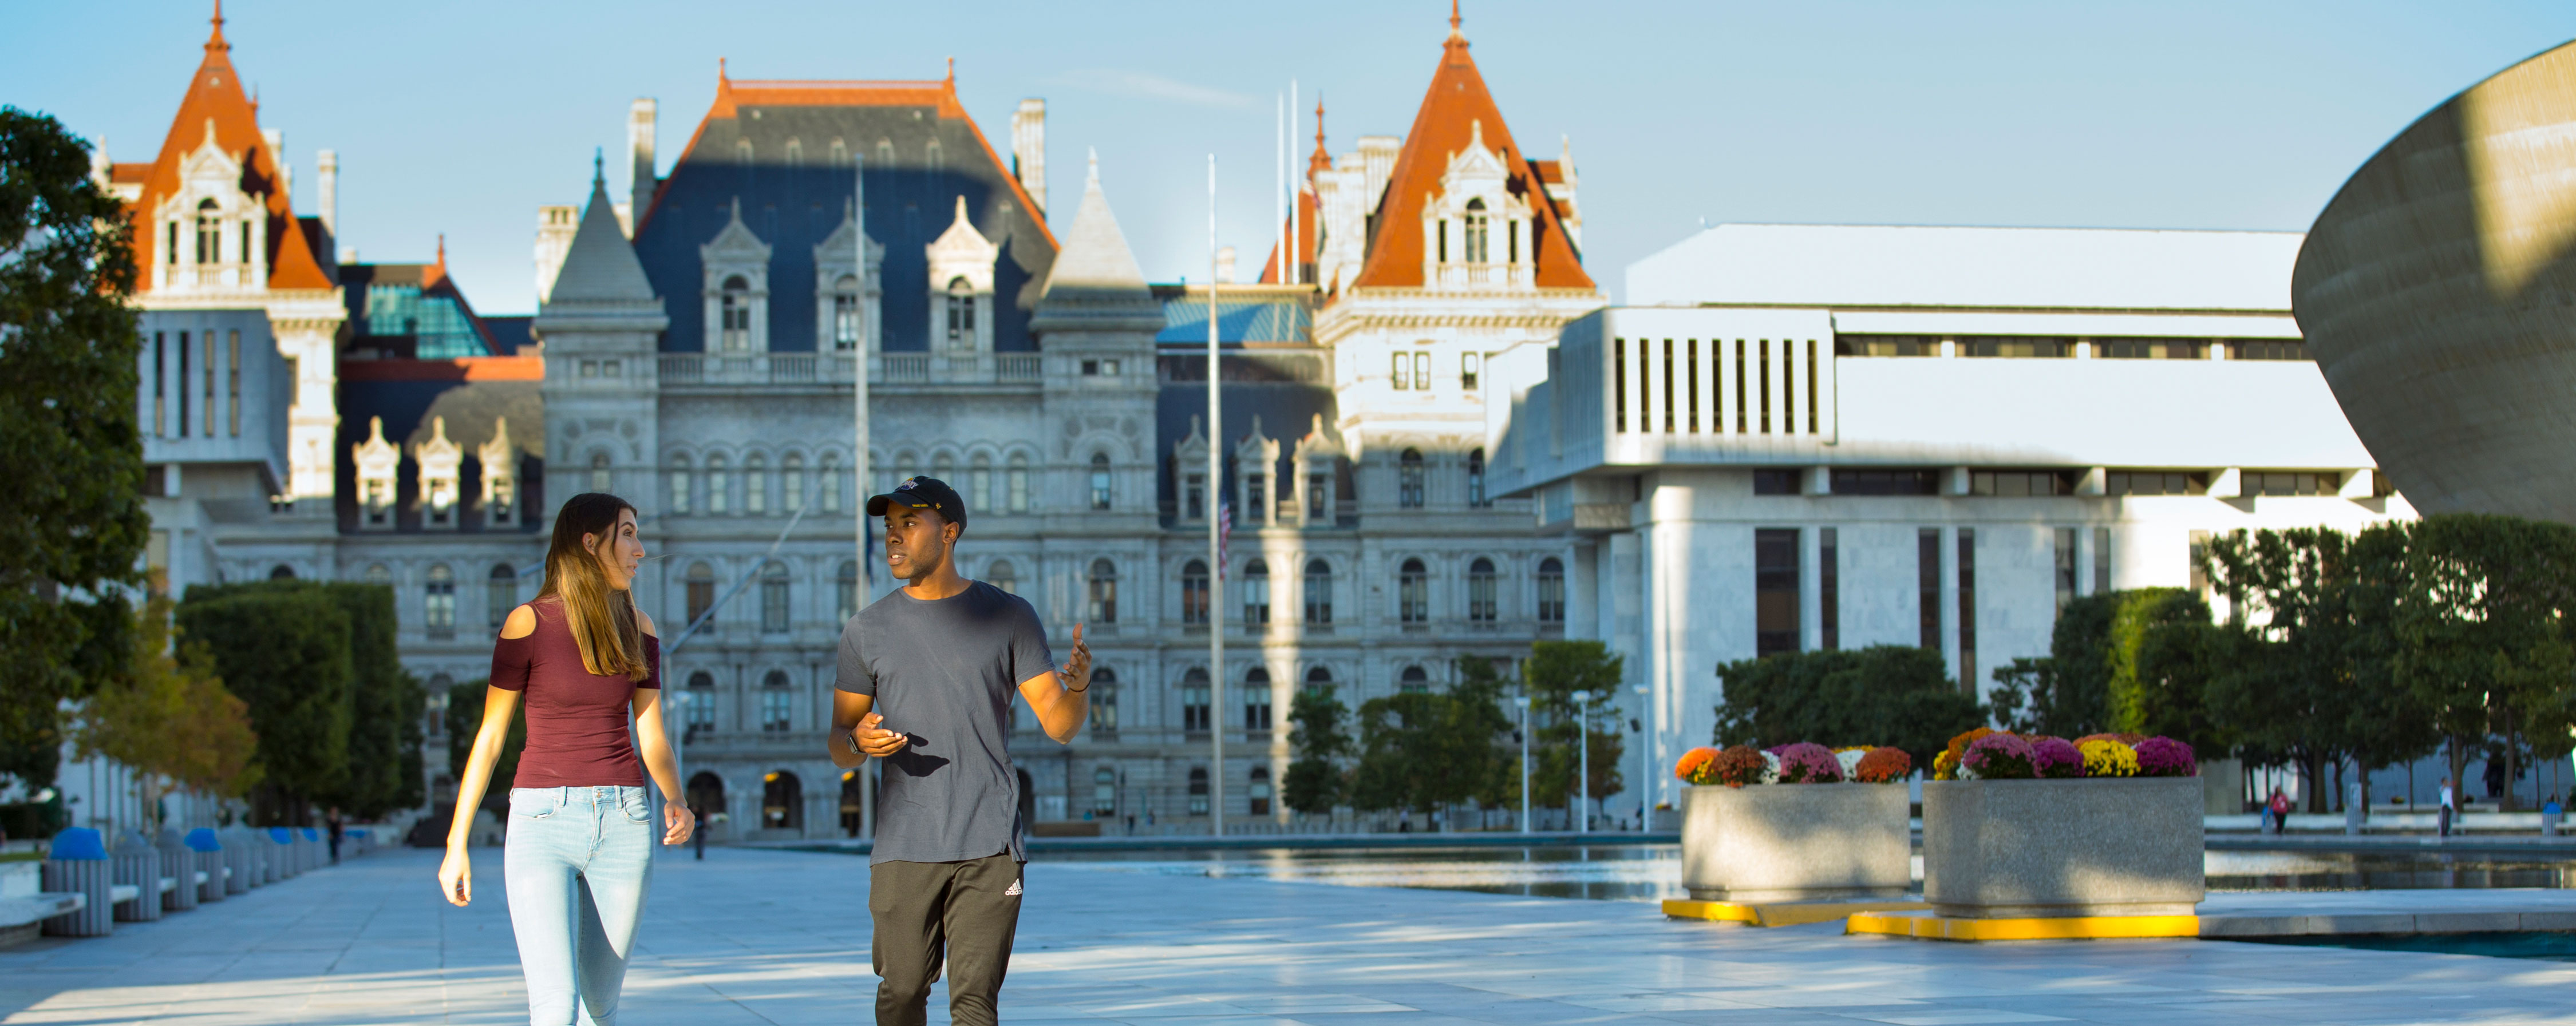 Two students gesture as they talk and walk along the Empire State Plaza, with the New York State Capitol Building behind them.